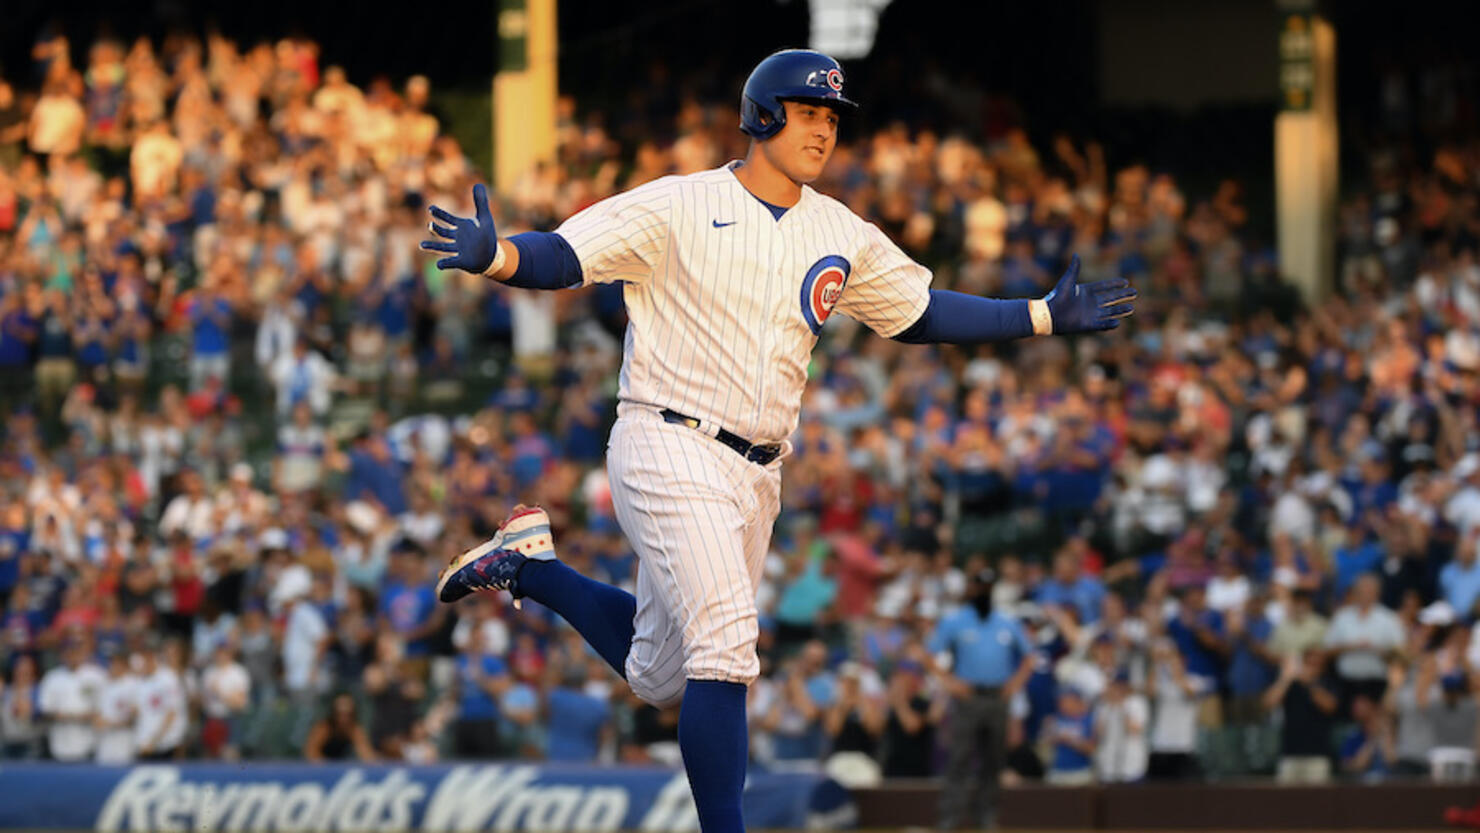 Anthony Rizzo already an all-time favorite Cub